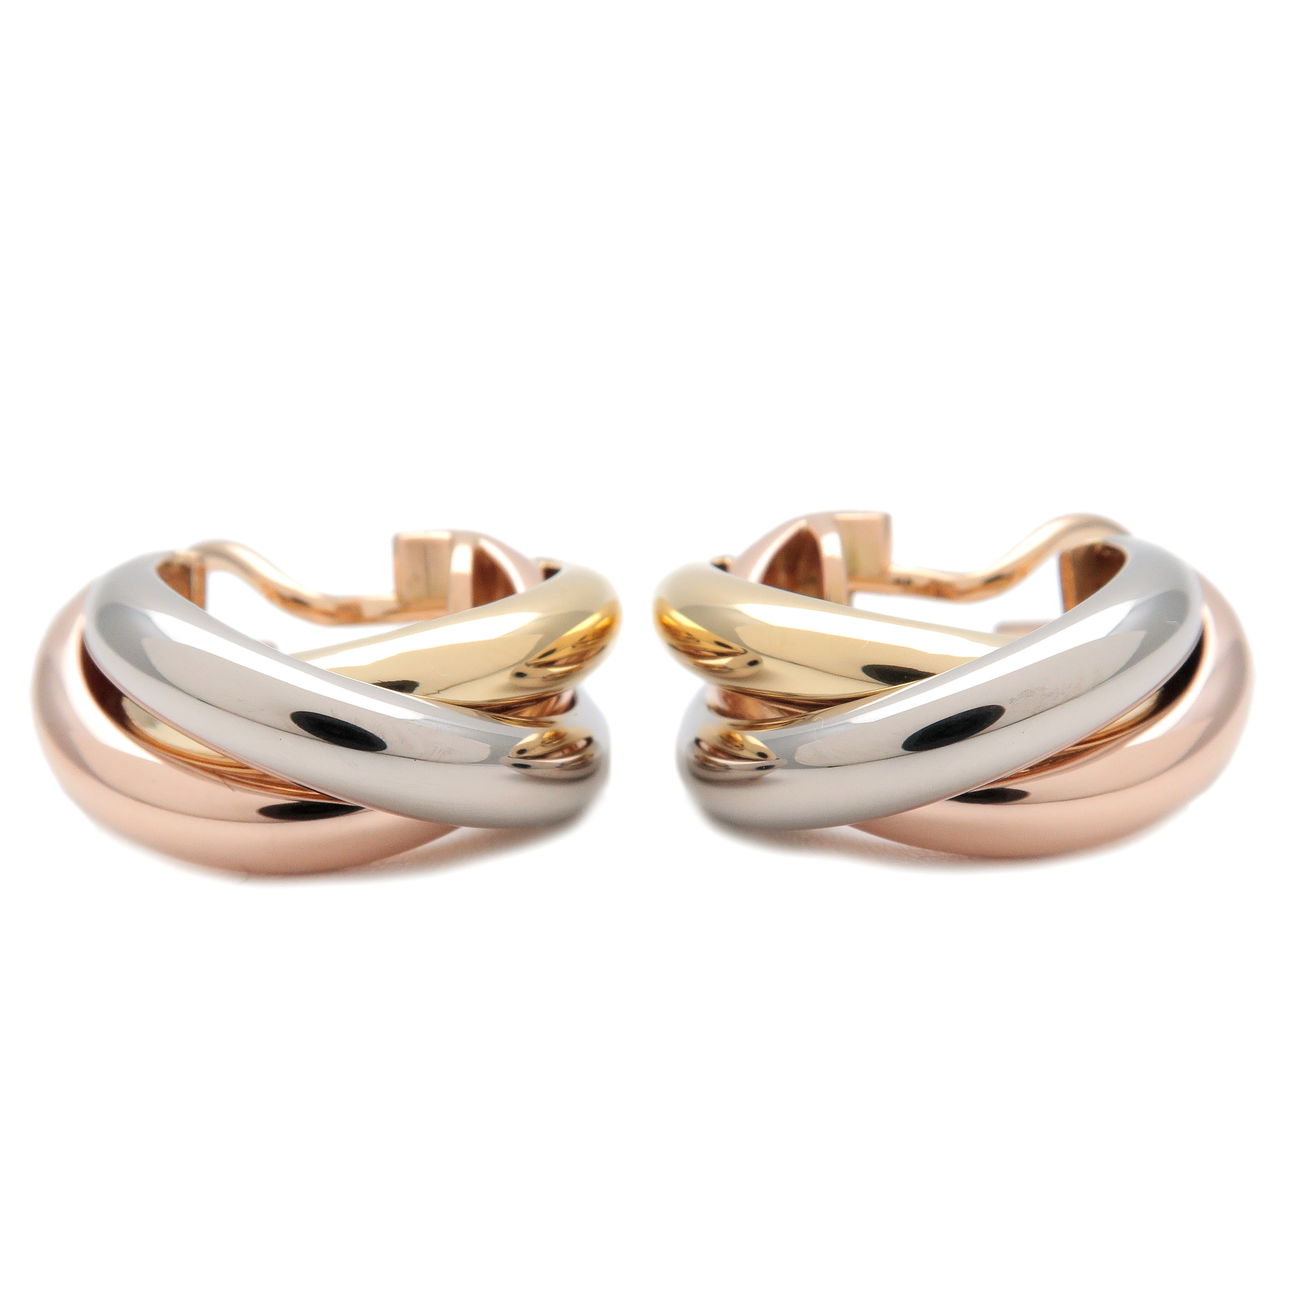 Cartier-Trinity-Earrings-K18-750-Yellow-Gold-Rose-Gold-White-Gold